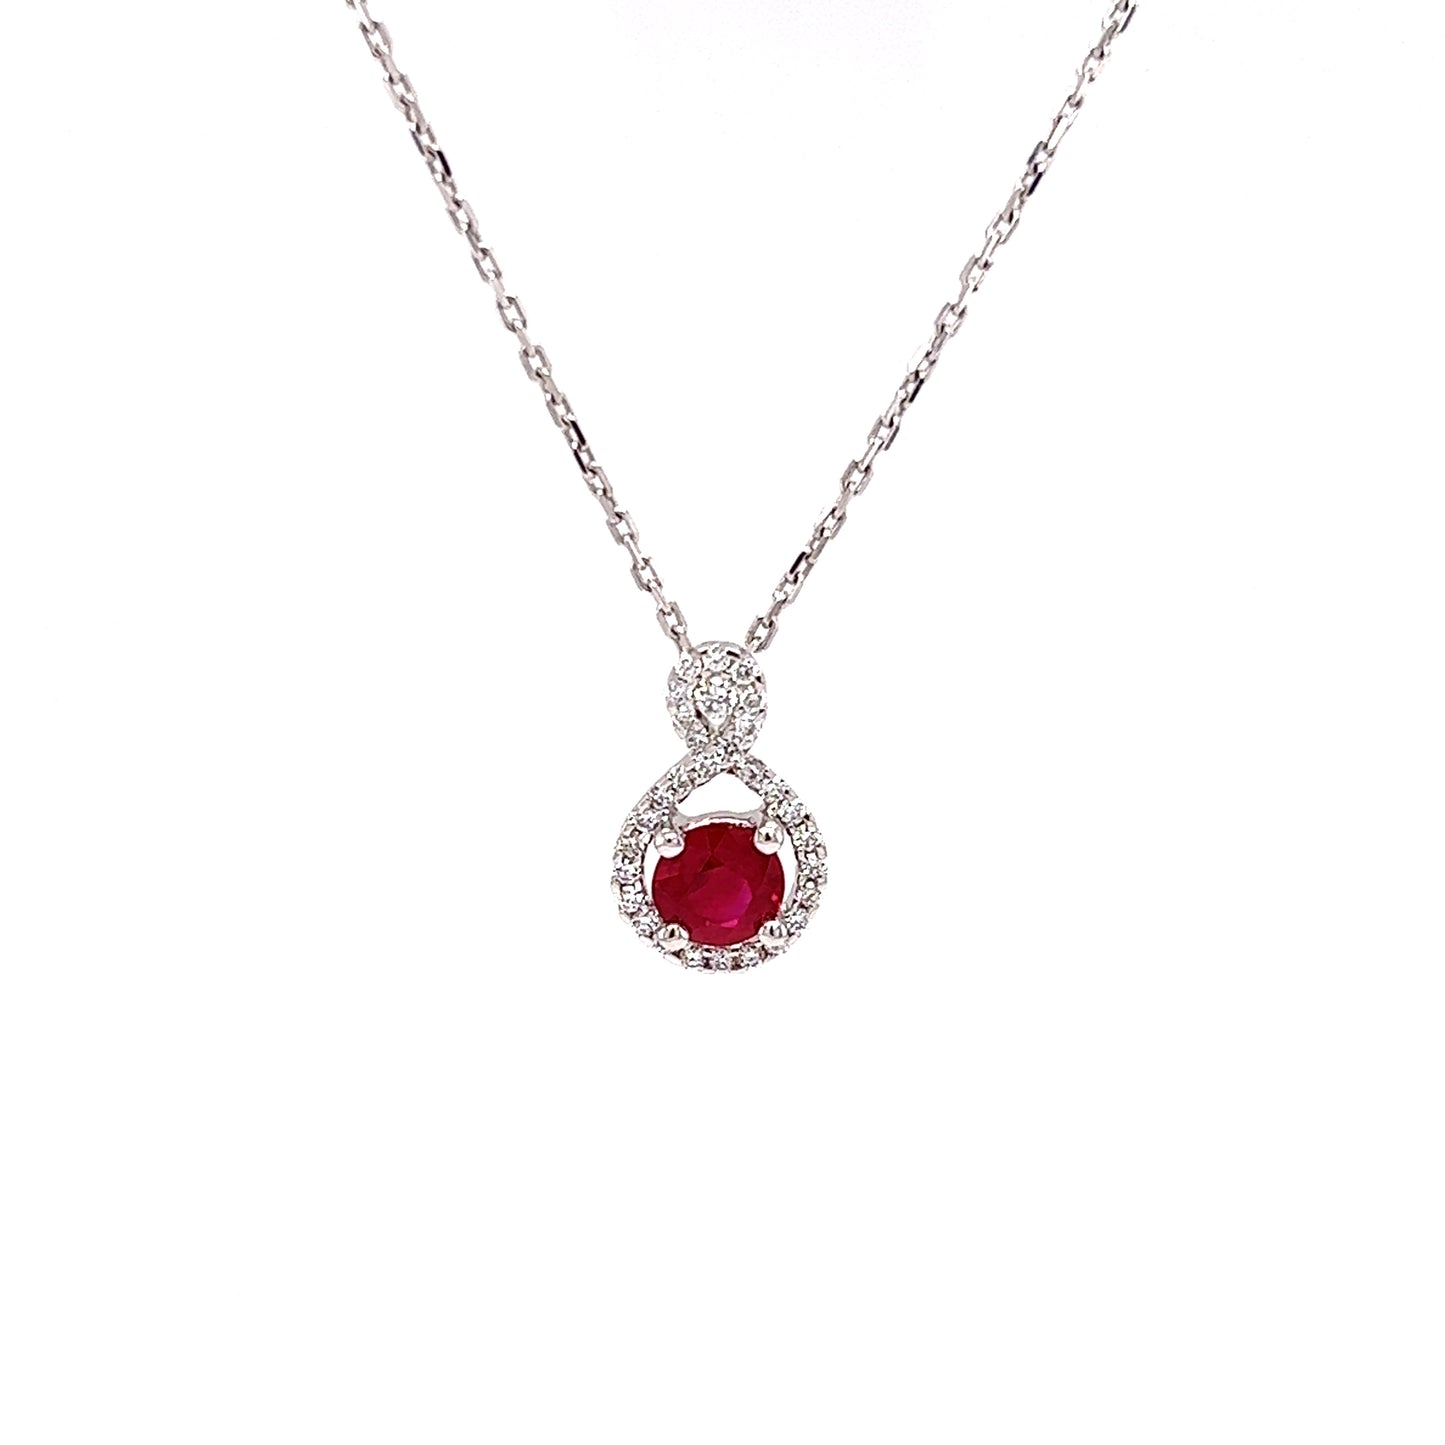 Round Ruby Necklace with 0.15ctw of Diamonds in 14K White Gold Pendant Font View